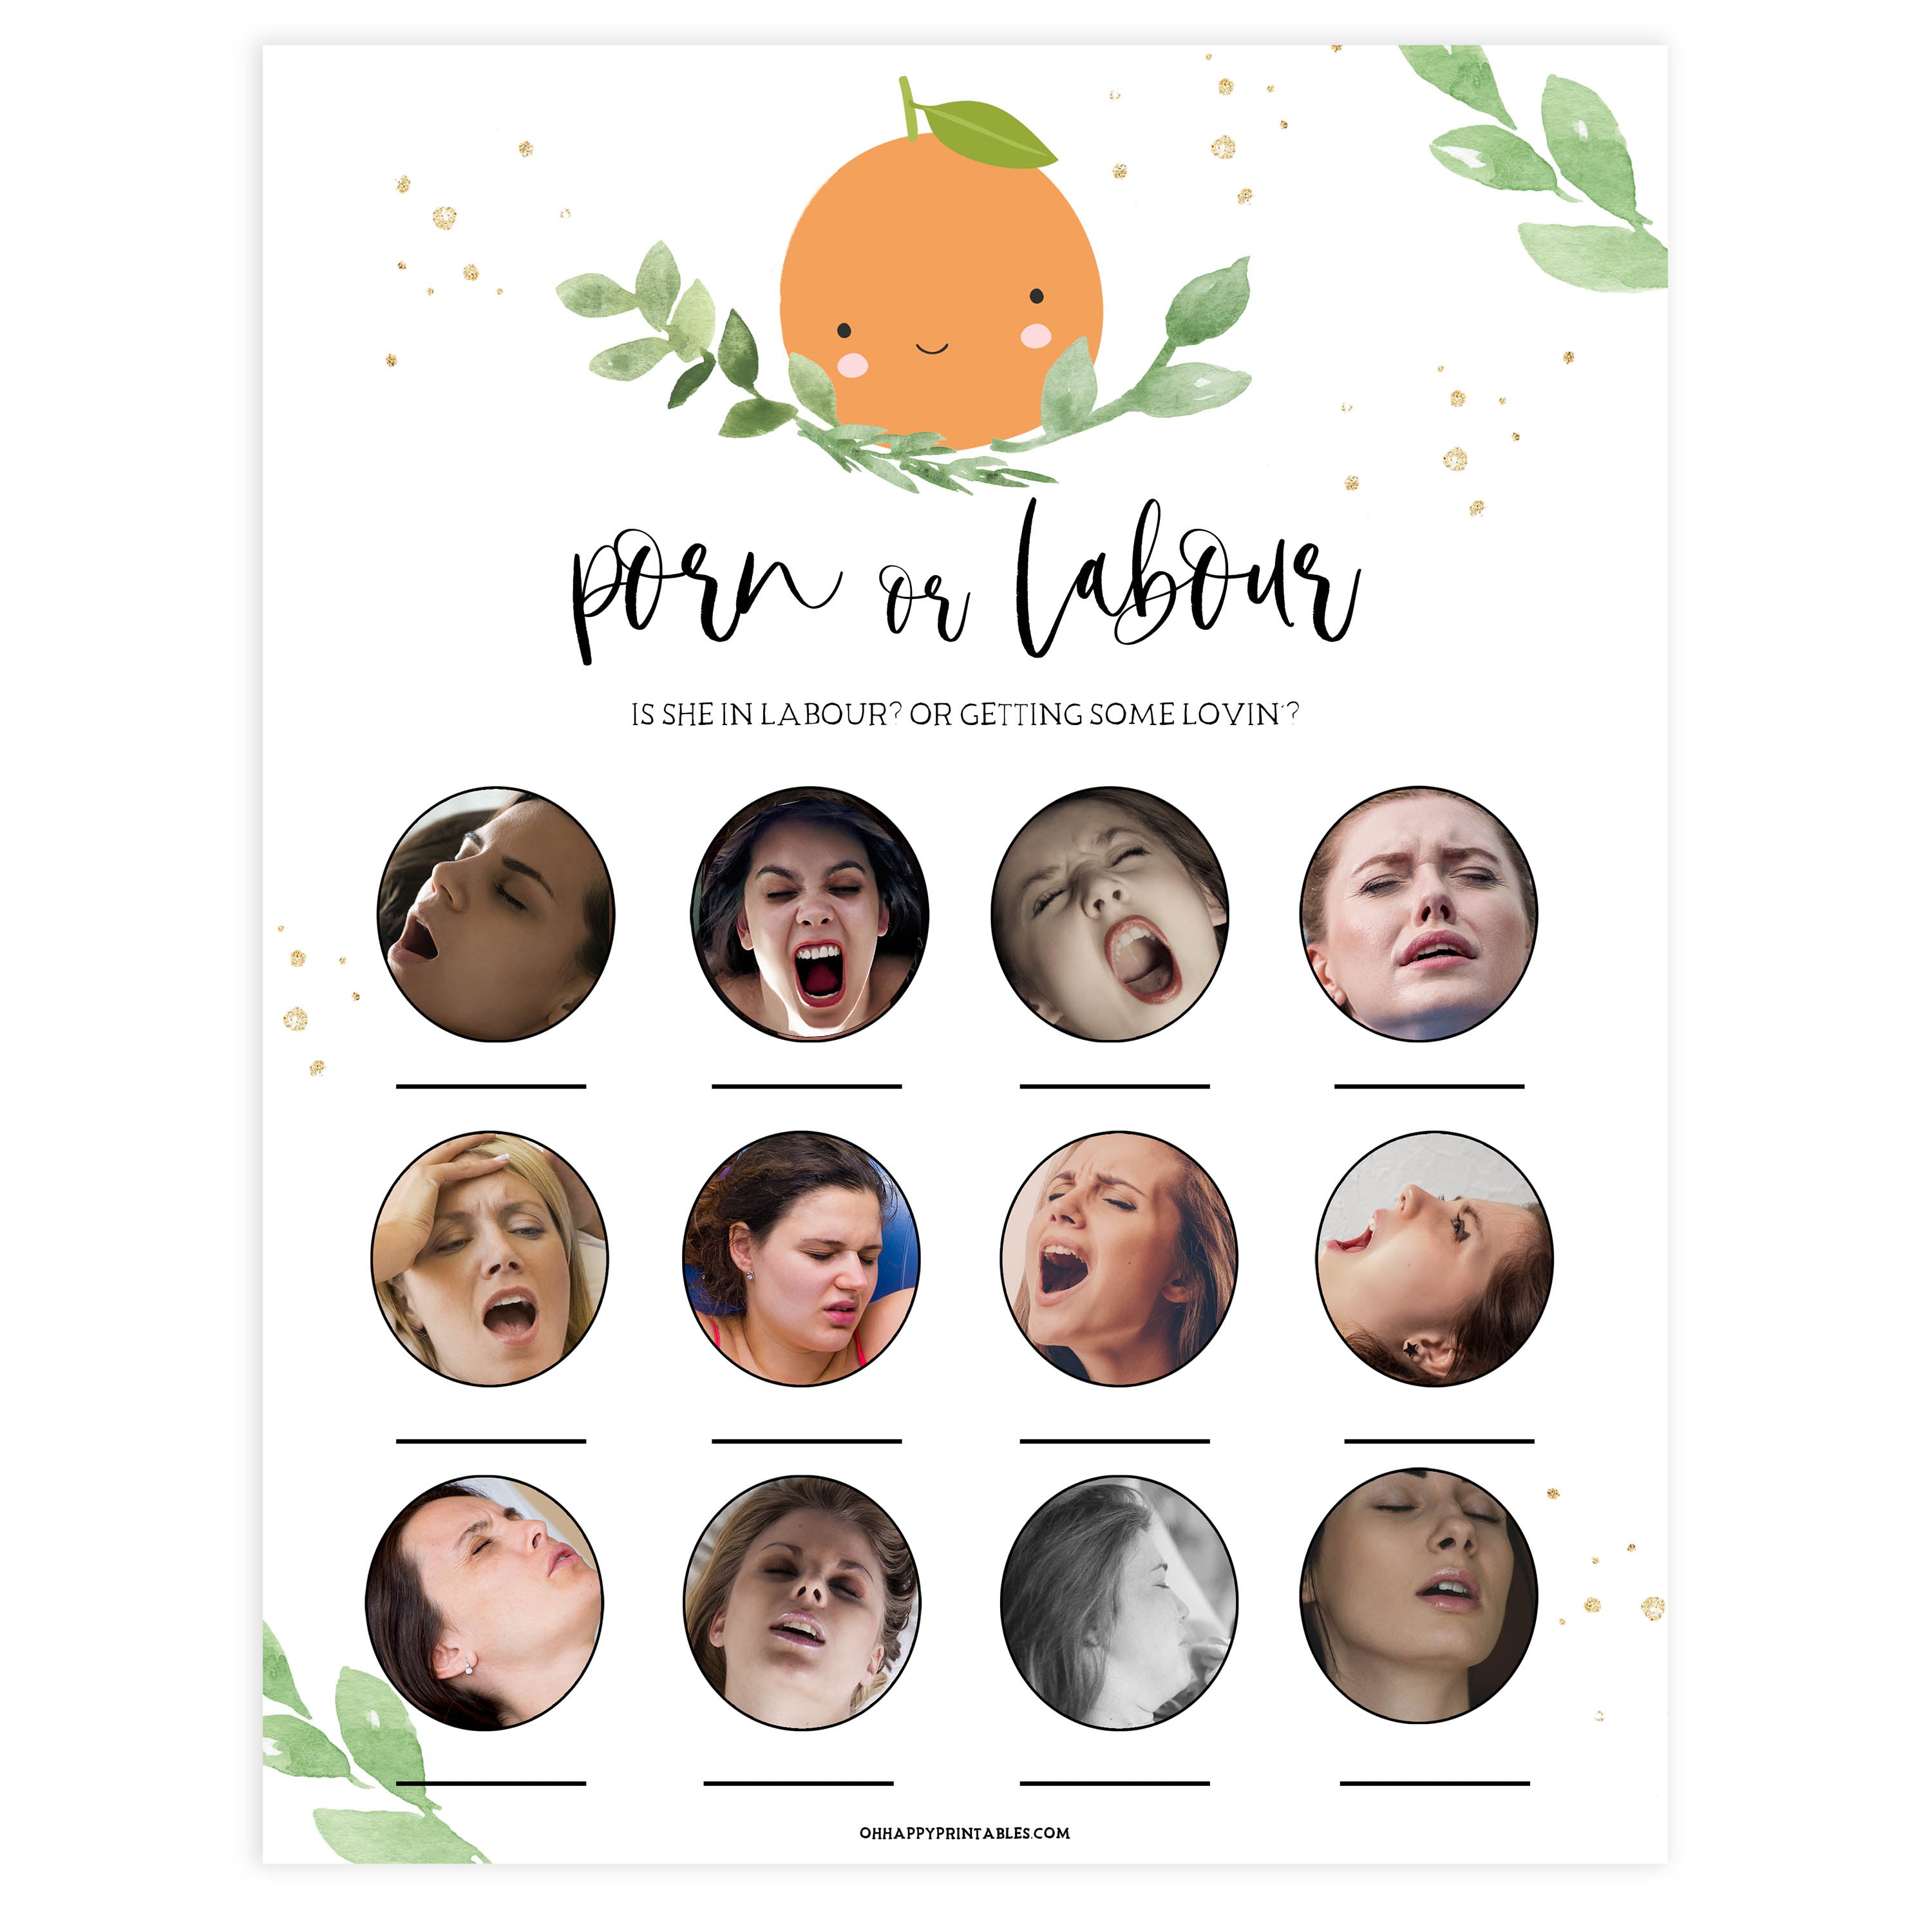 porn or labor baby game, Printable baby shower games, little cutie baby games, baby shower games, fun baby shower ideas, top baby shower ideas, little cutie baby shower, baby shower games, fun little cutie baby shower ideas